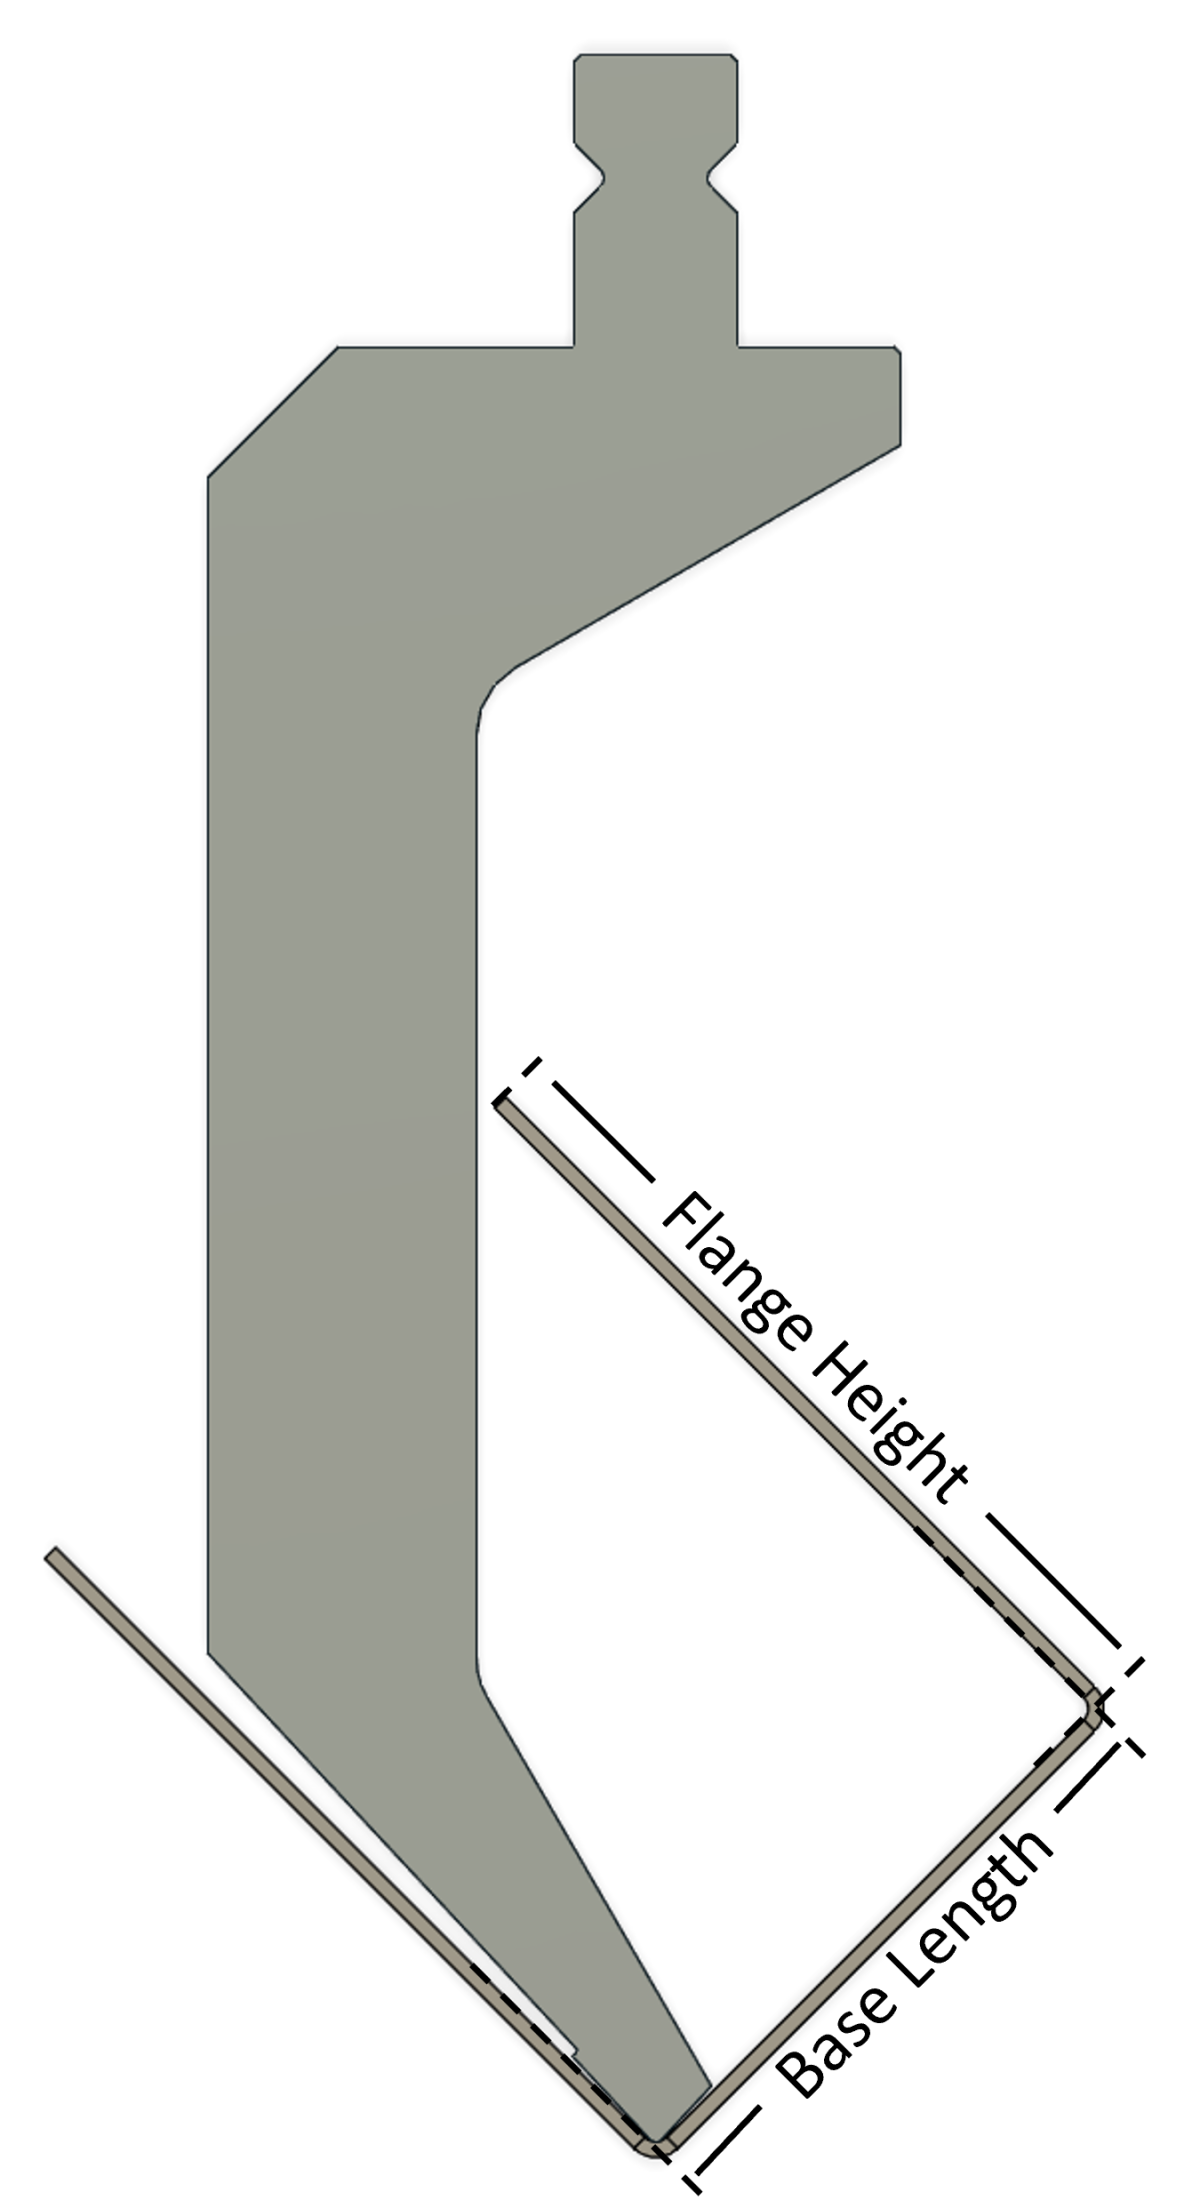 The maximum flange height on a sheet metal part depends on the base length and the punch profile.